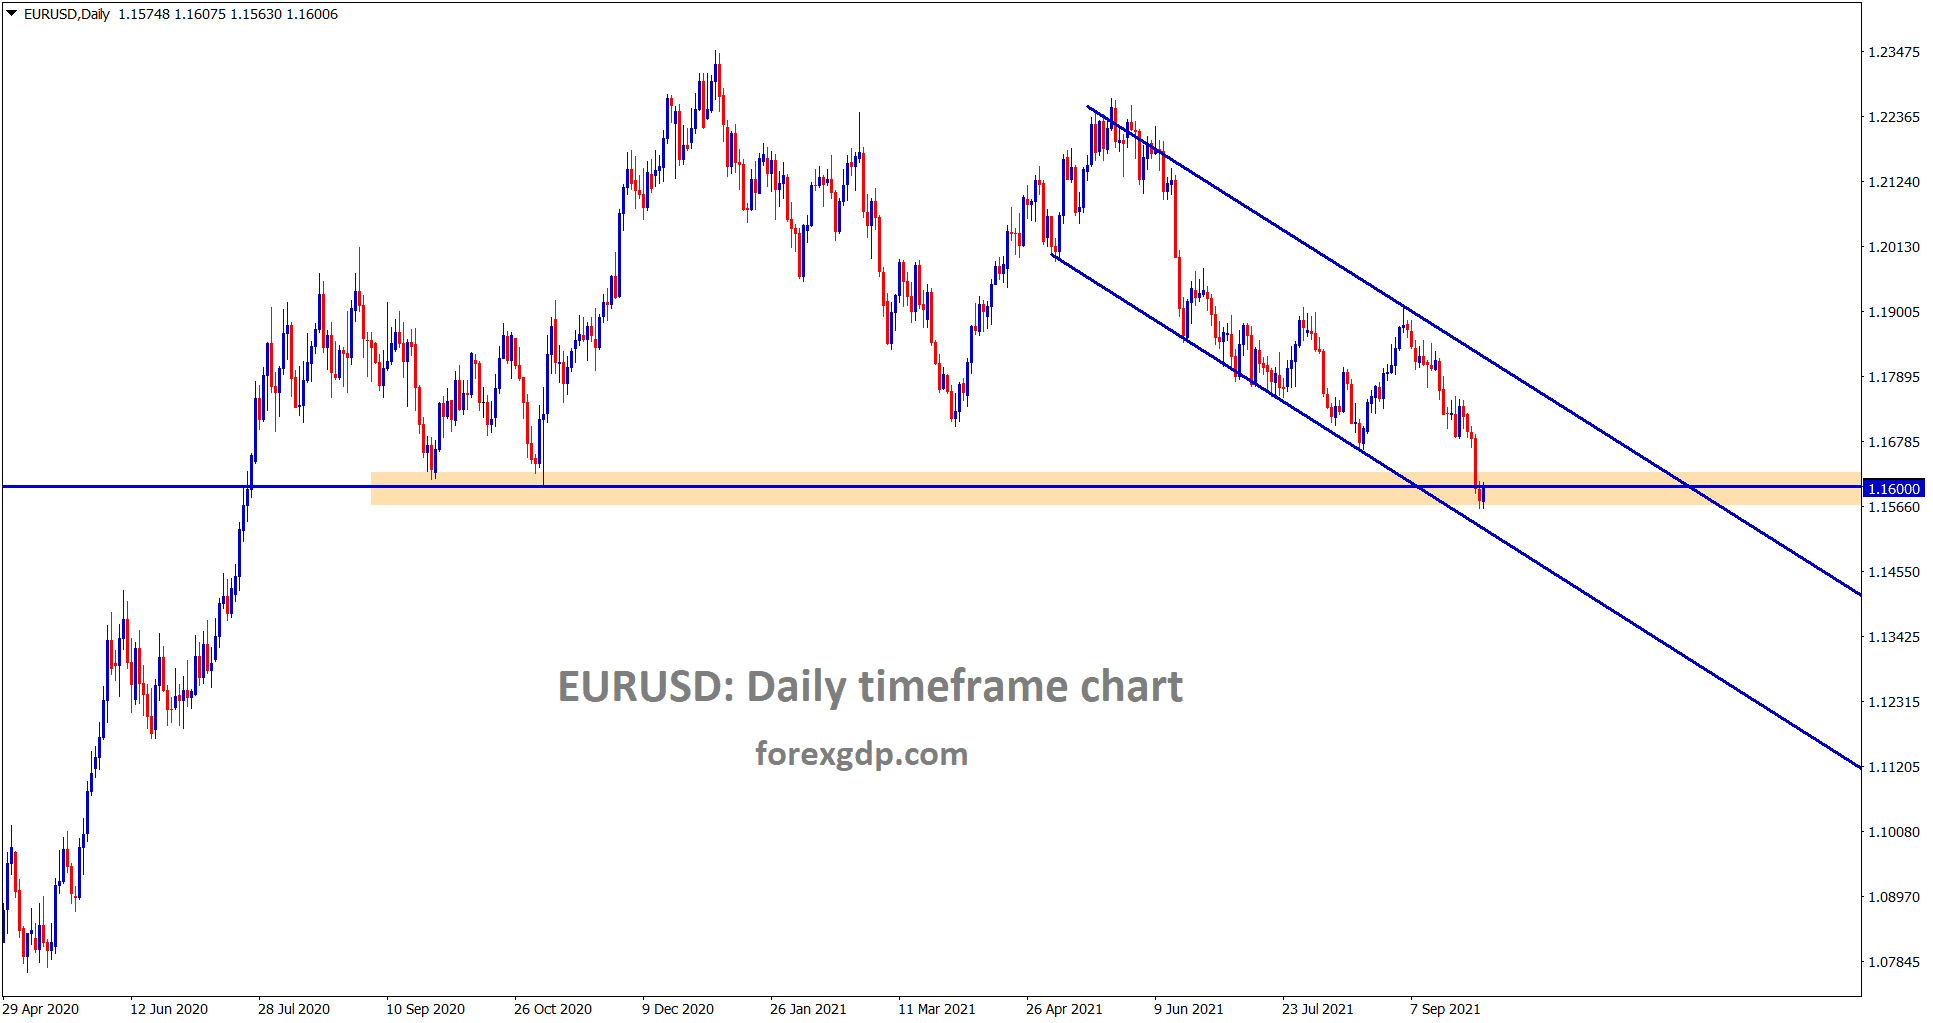 EURUSD is still consolidating at strong support and the lower low level of a descending channel